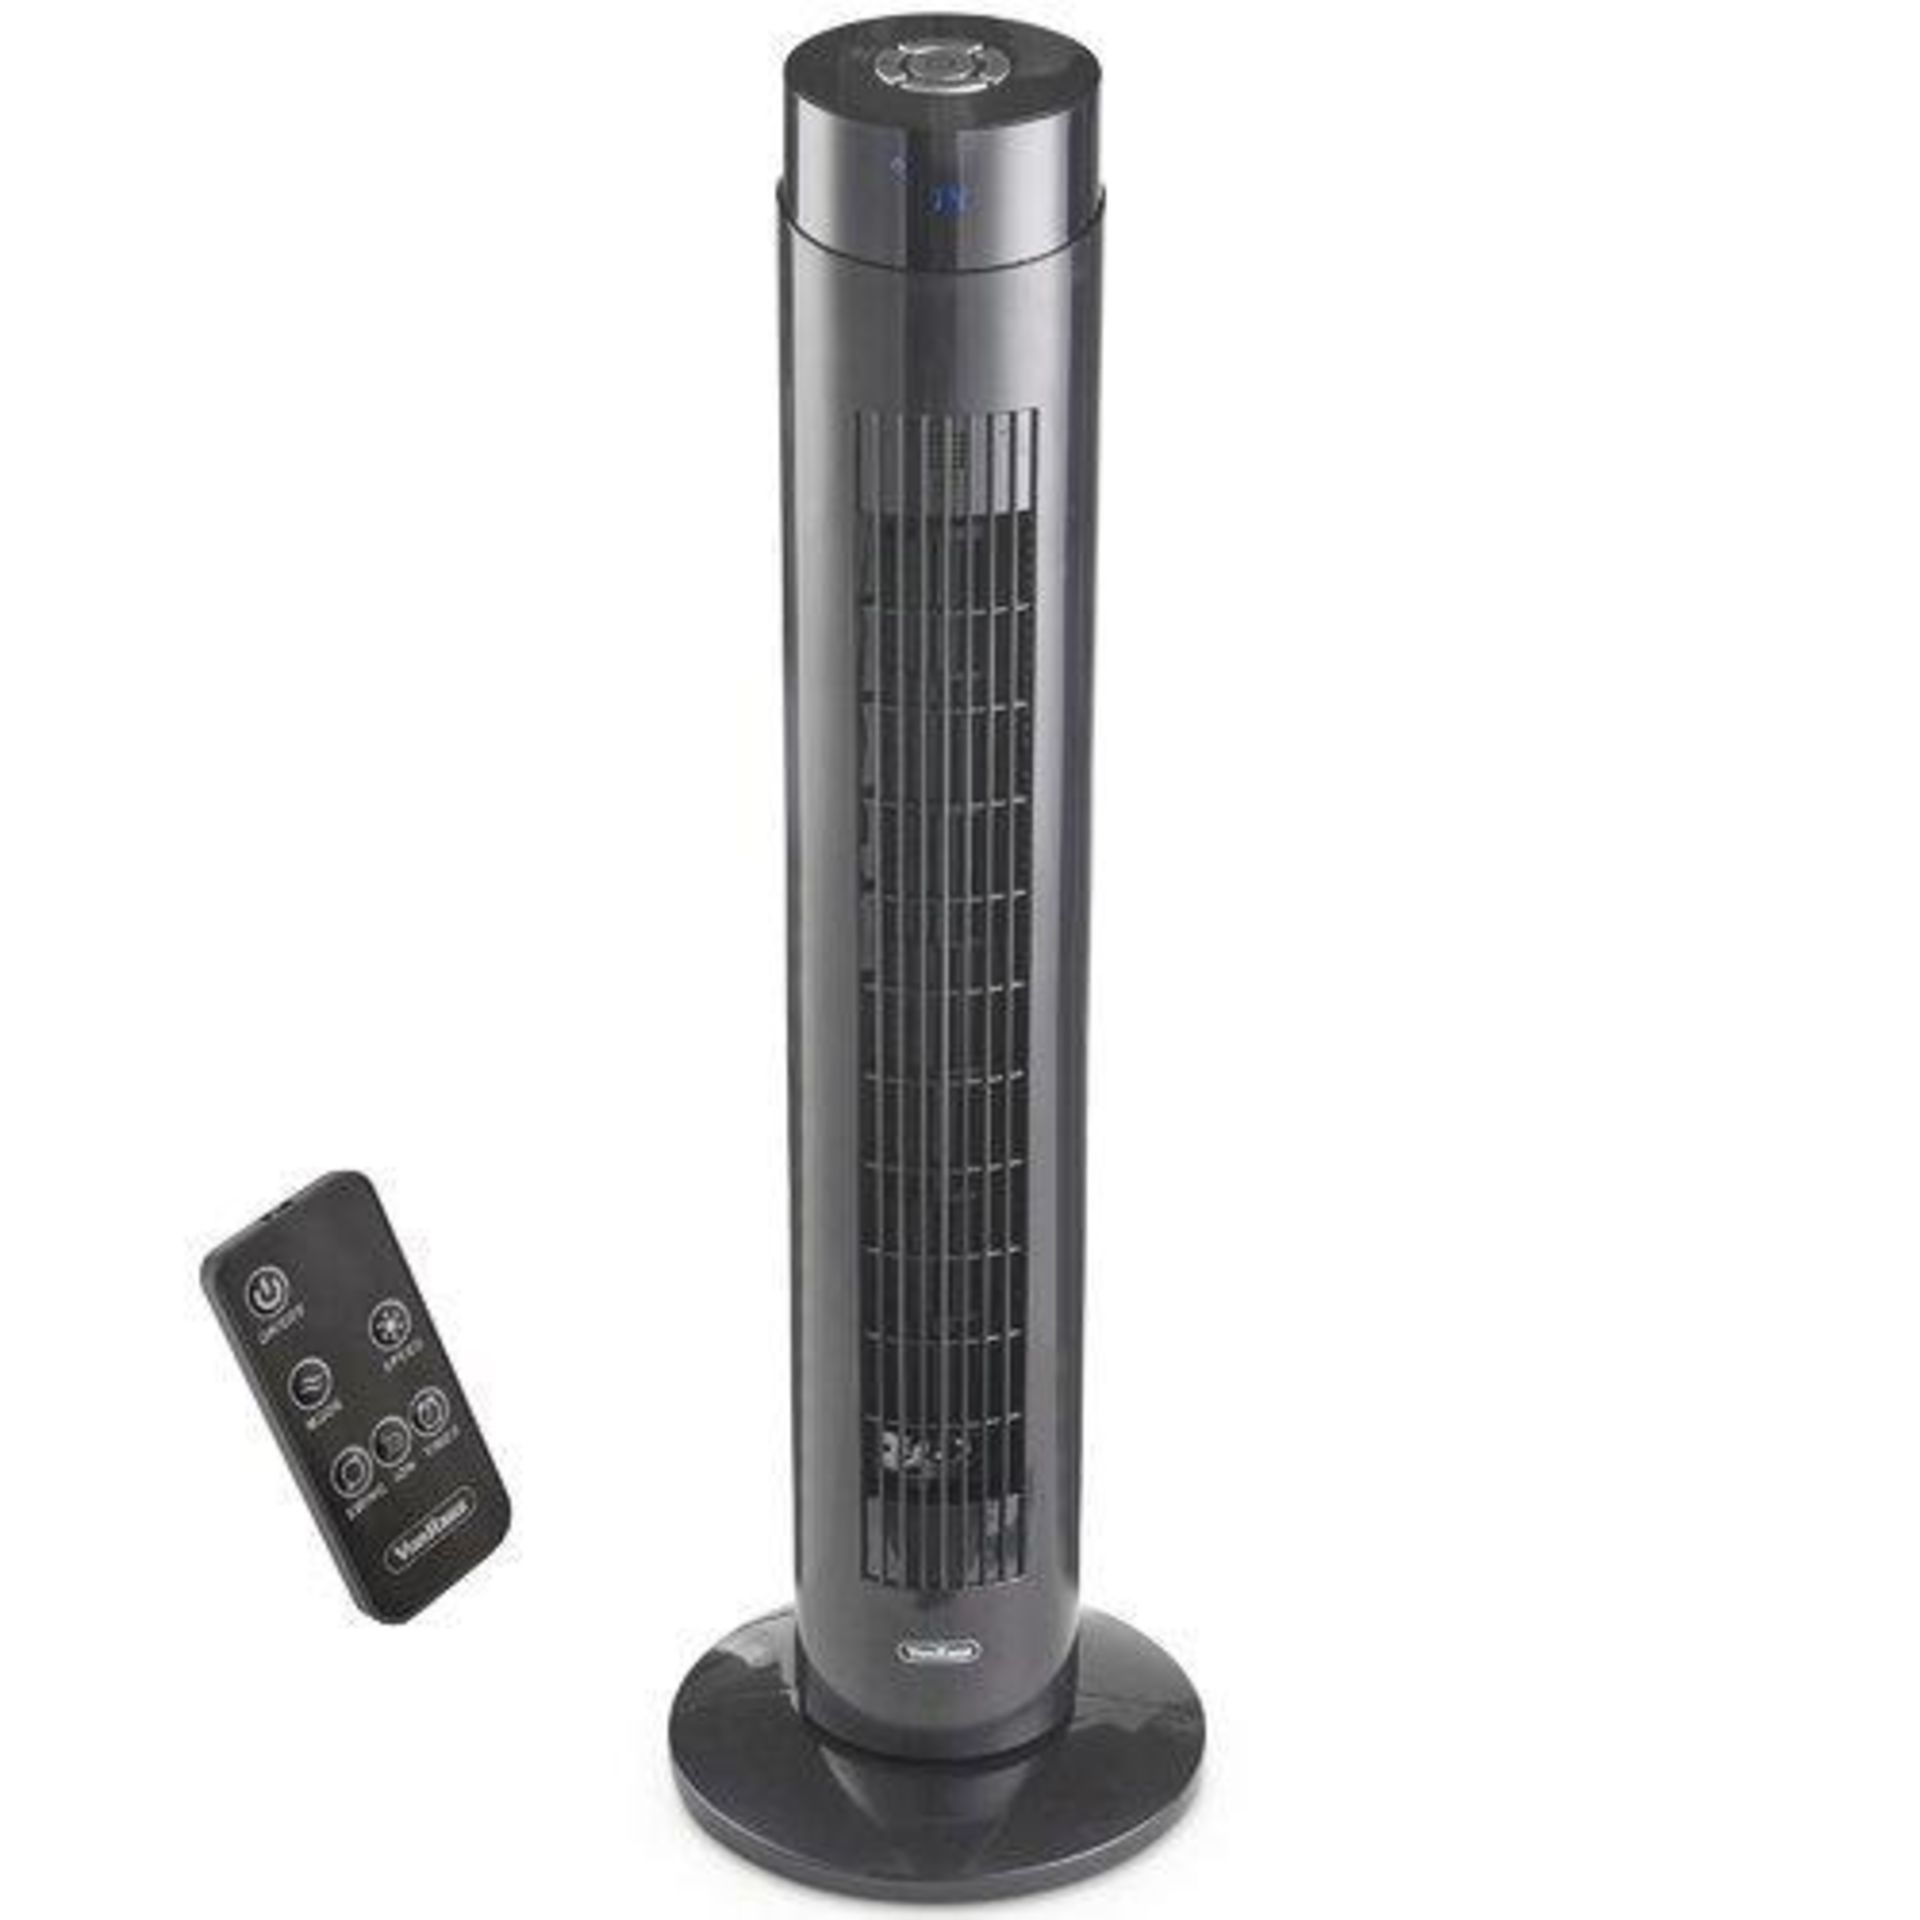 Black 35" Tower Fan 35" Tower Fan - BlackChill out with this sleek black tower fan. Ideal for home